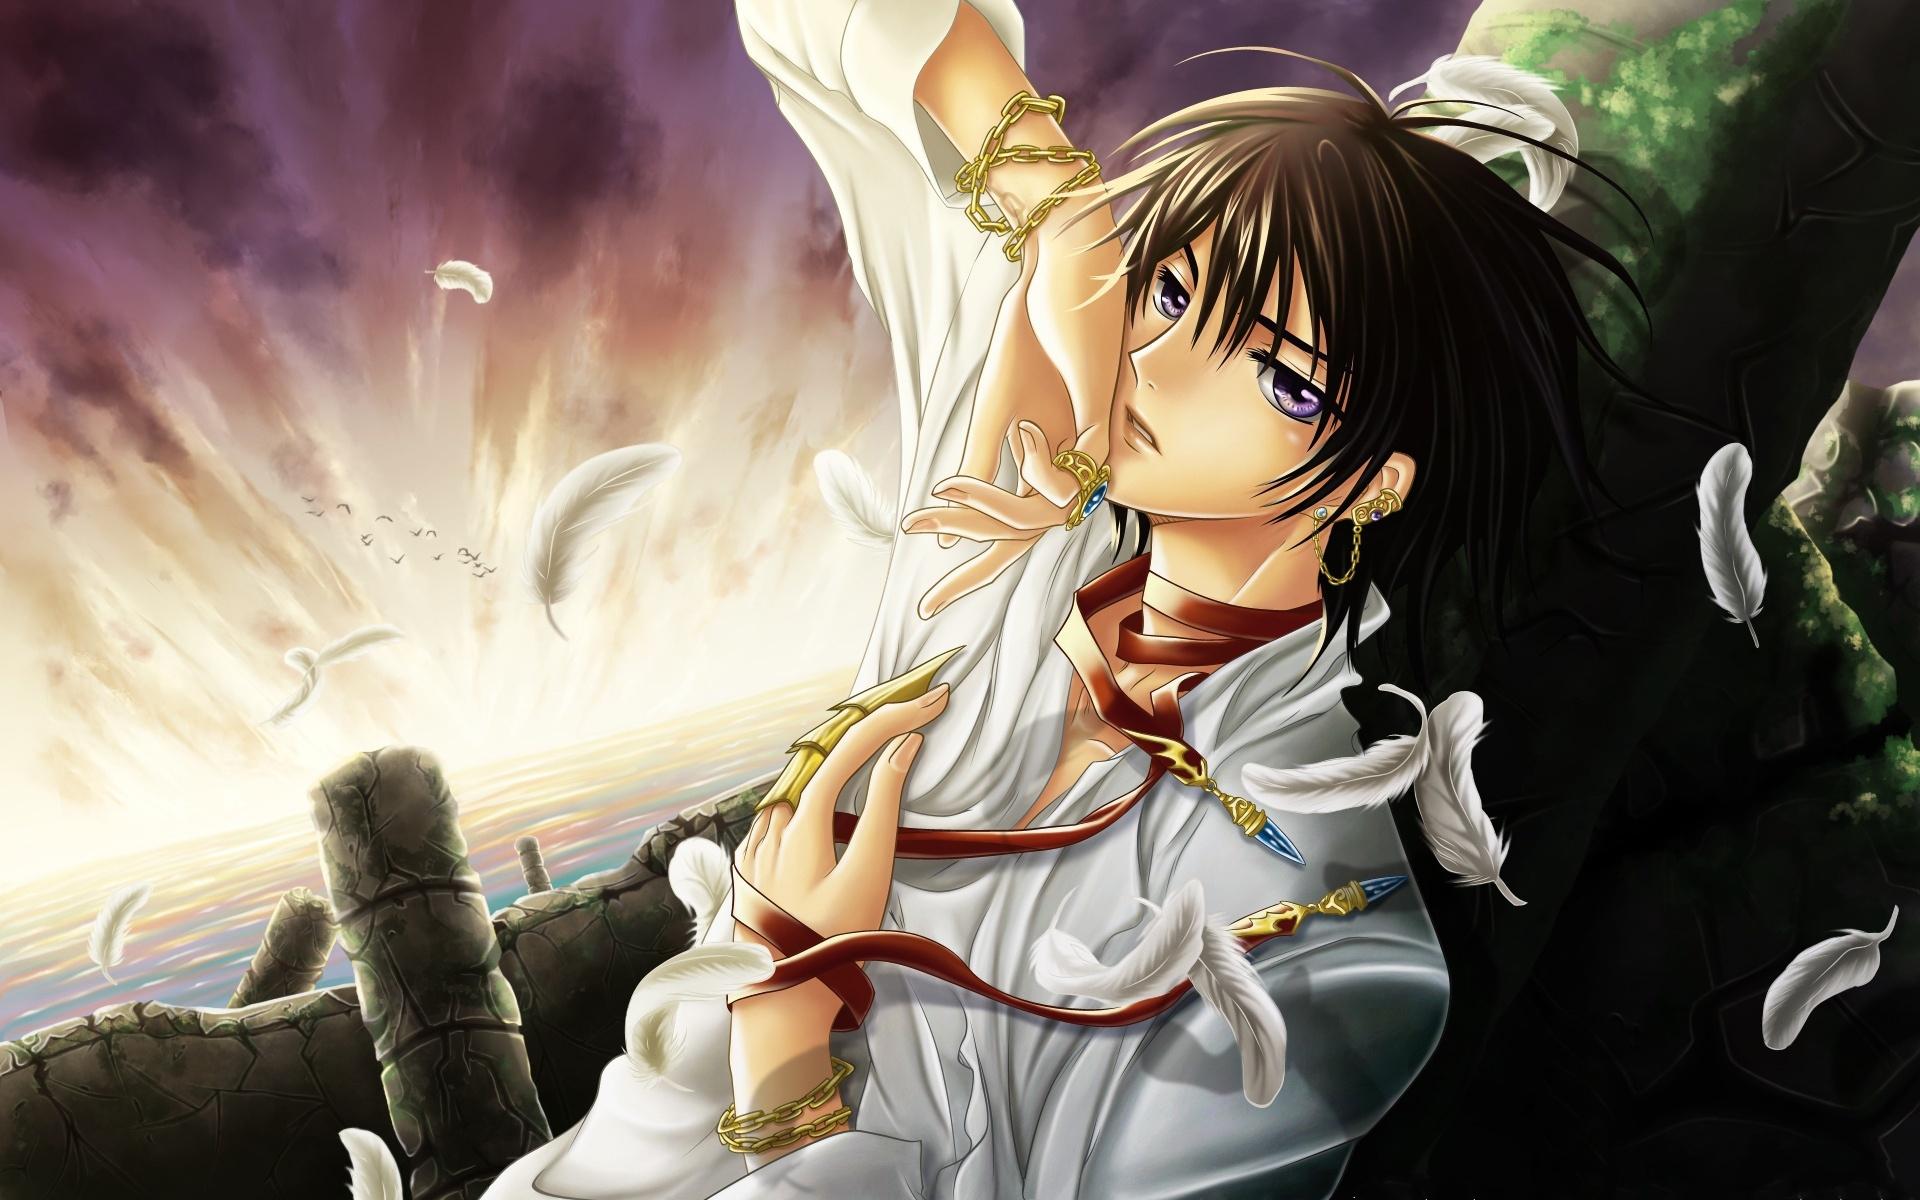 Anime Boy Background for Desktop | HD Wallpapers, Backgrounds, Images